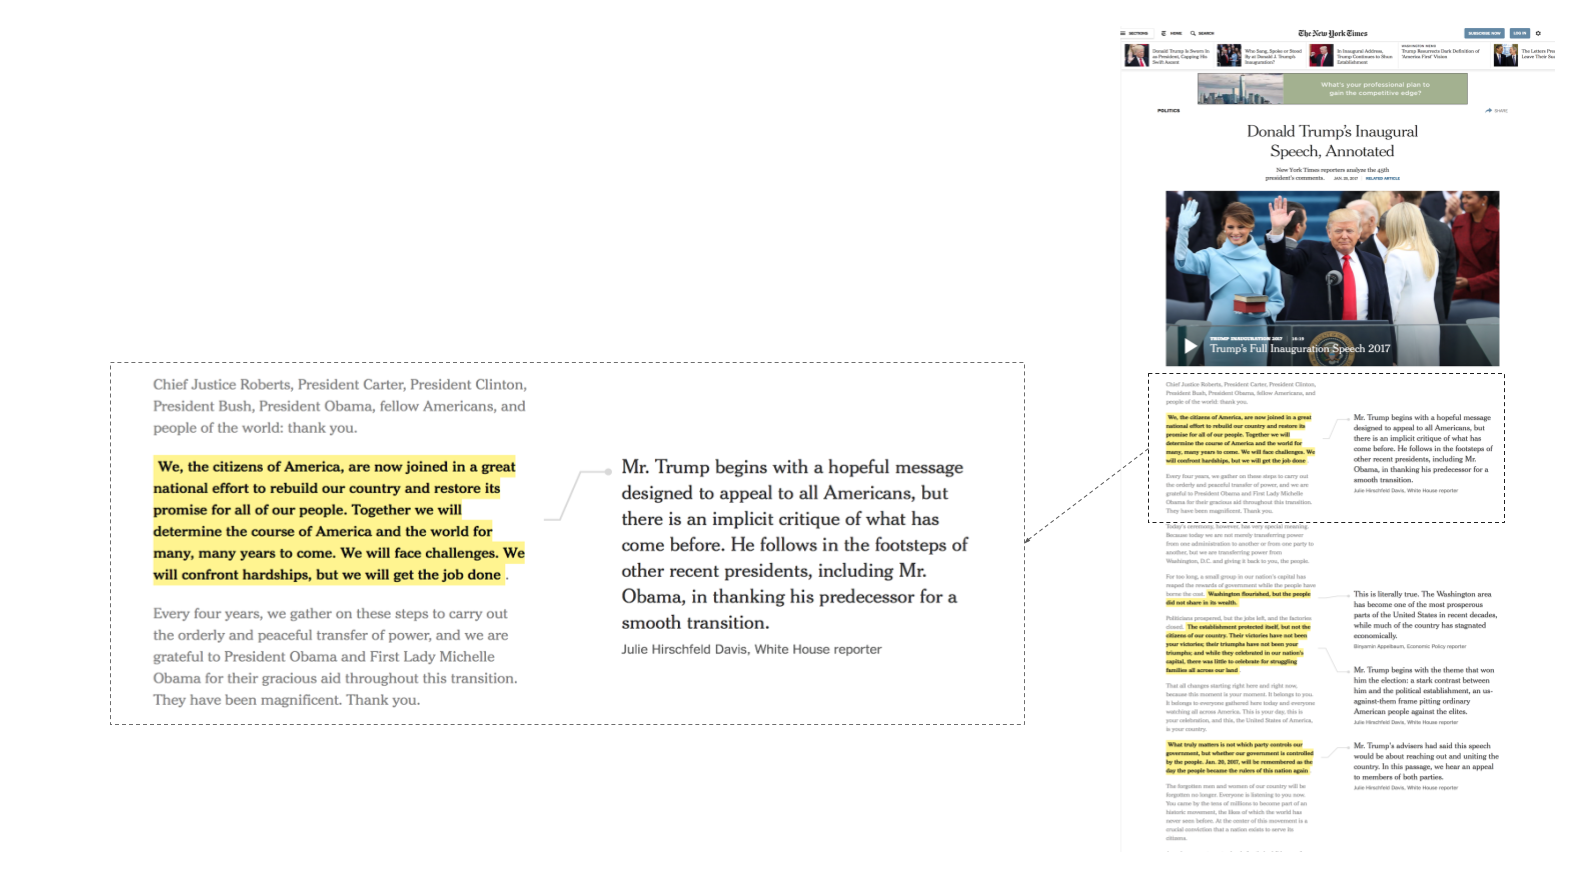 NYT annotations